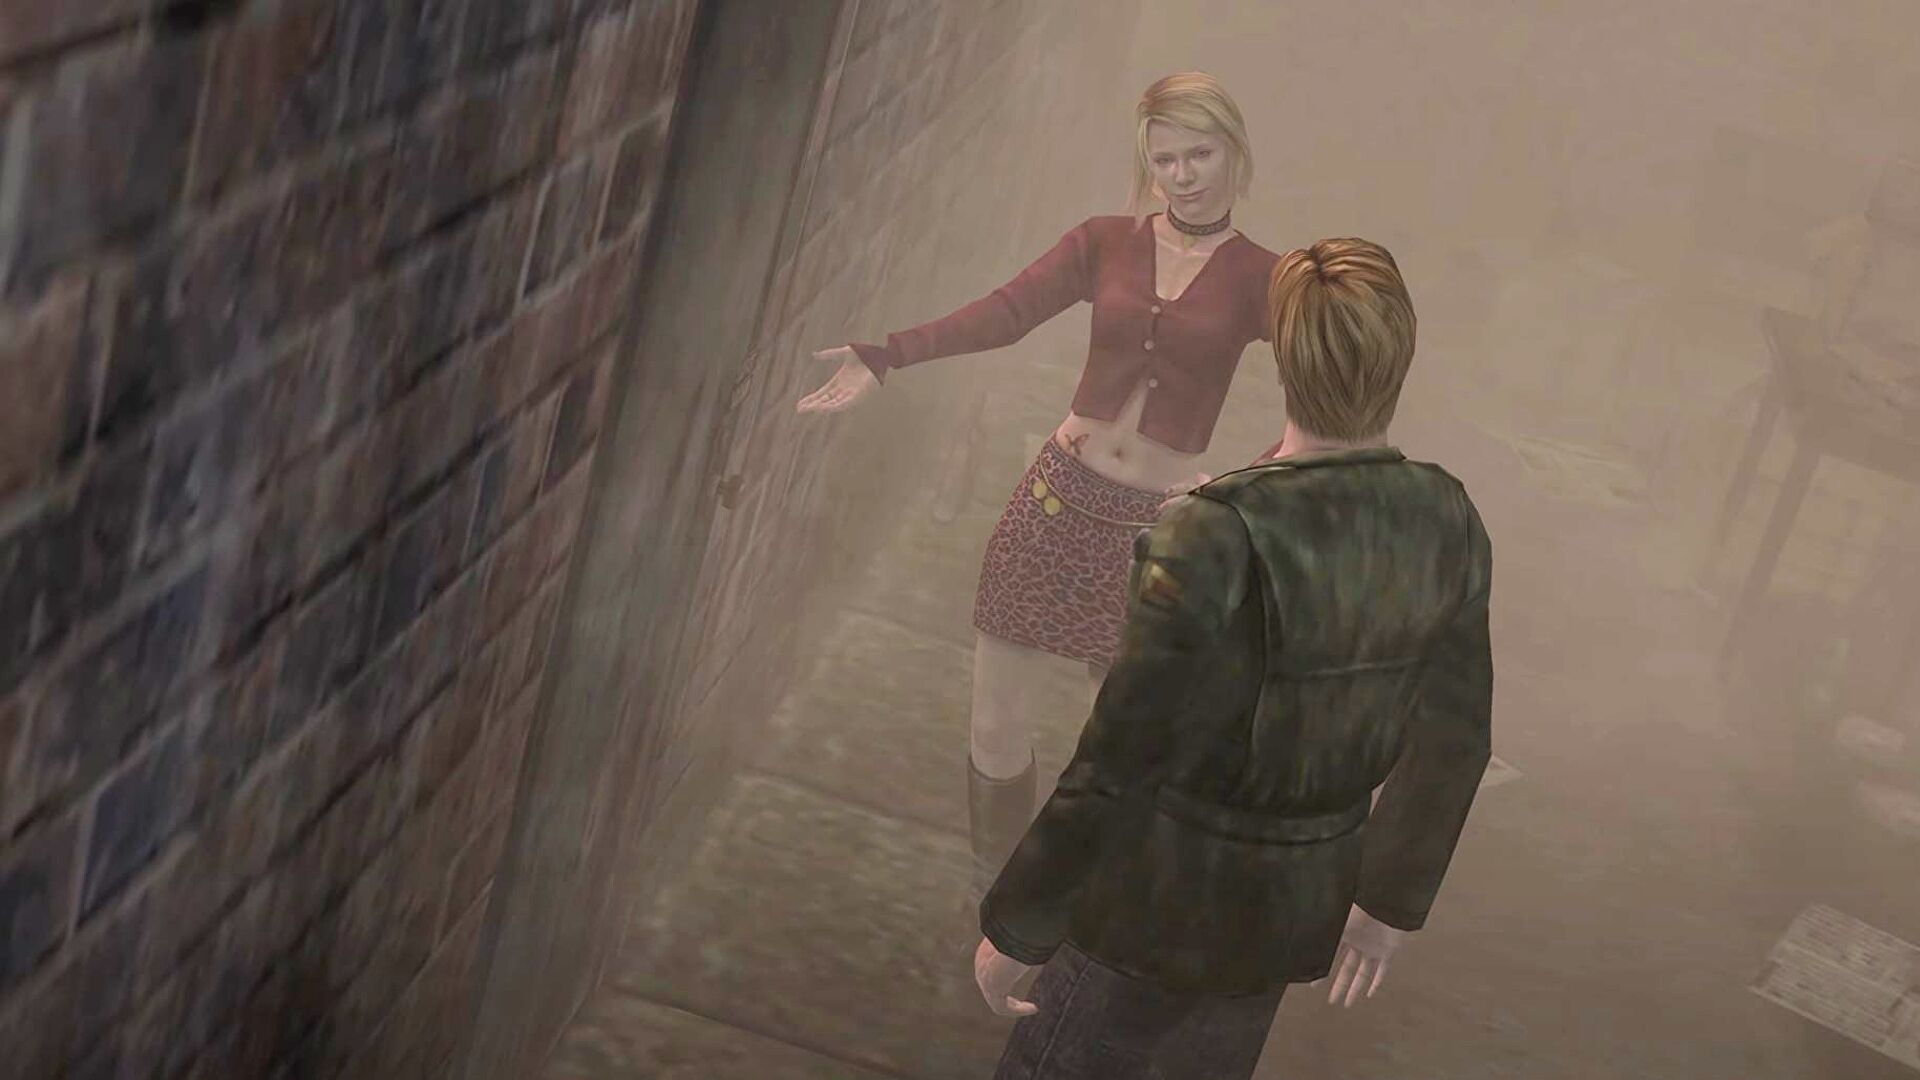 the-silent-hill-2-remake-rumour-train-is-chugging-again-thanks-to-some-very-blurry-images